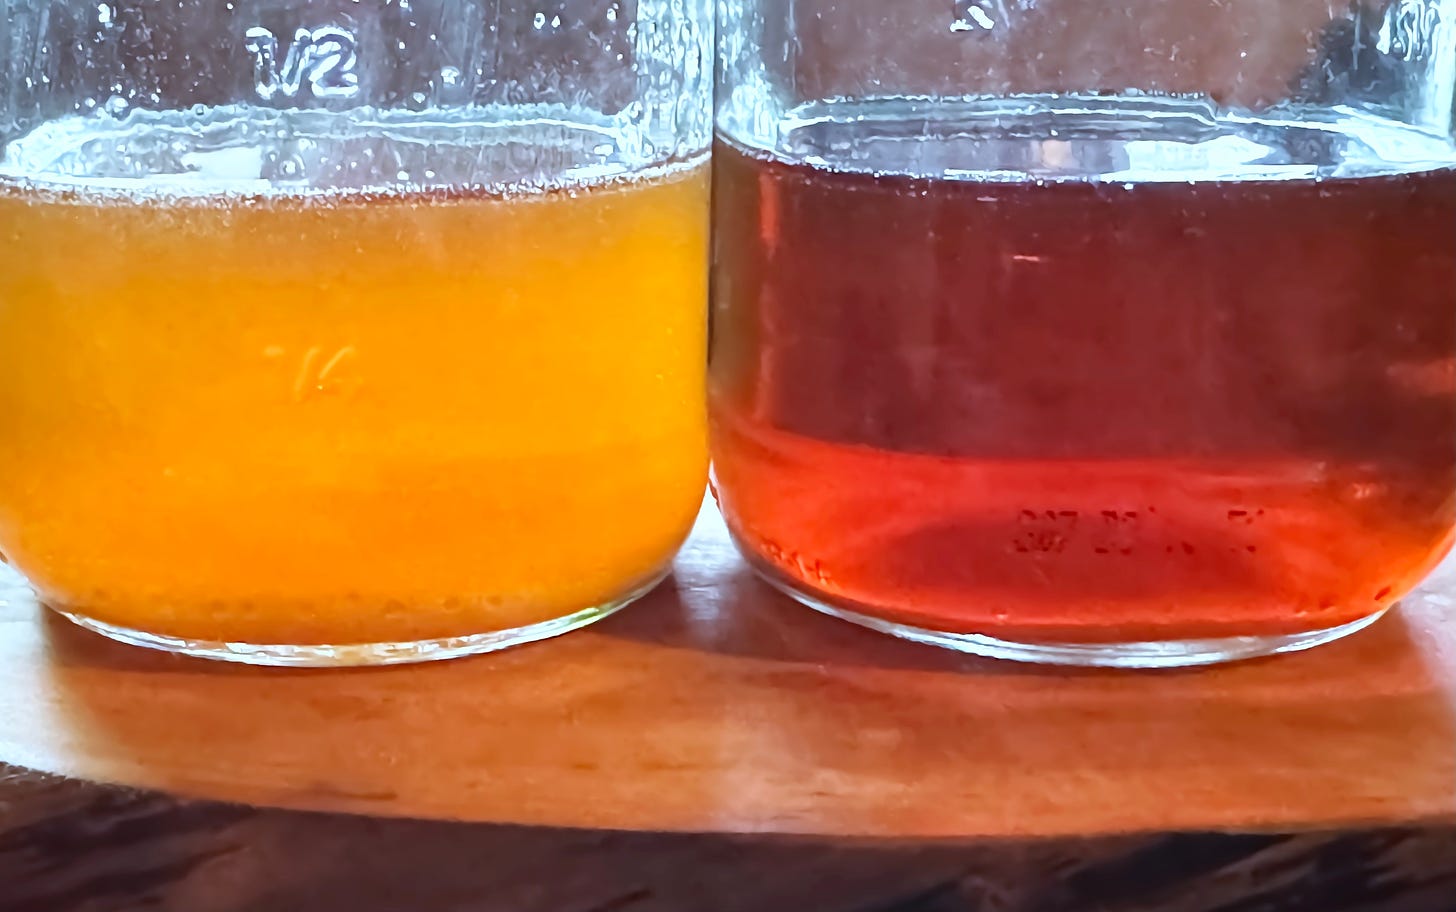 Two jars of maple syrup, golden on the left, amber on the right.